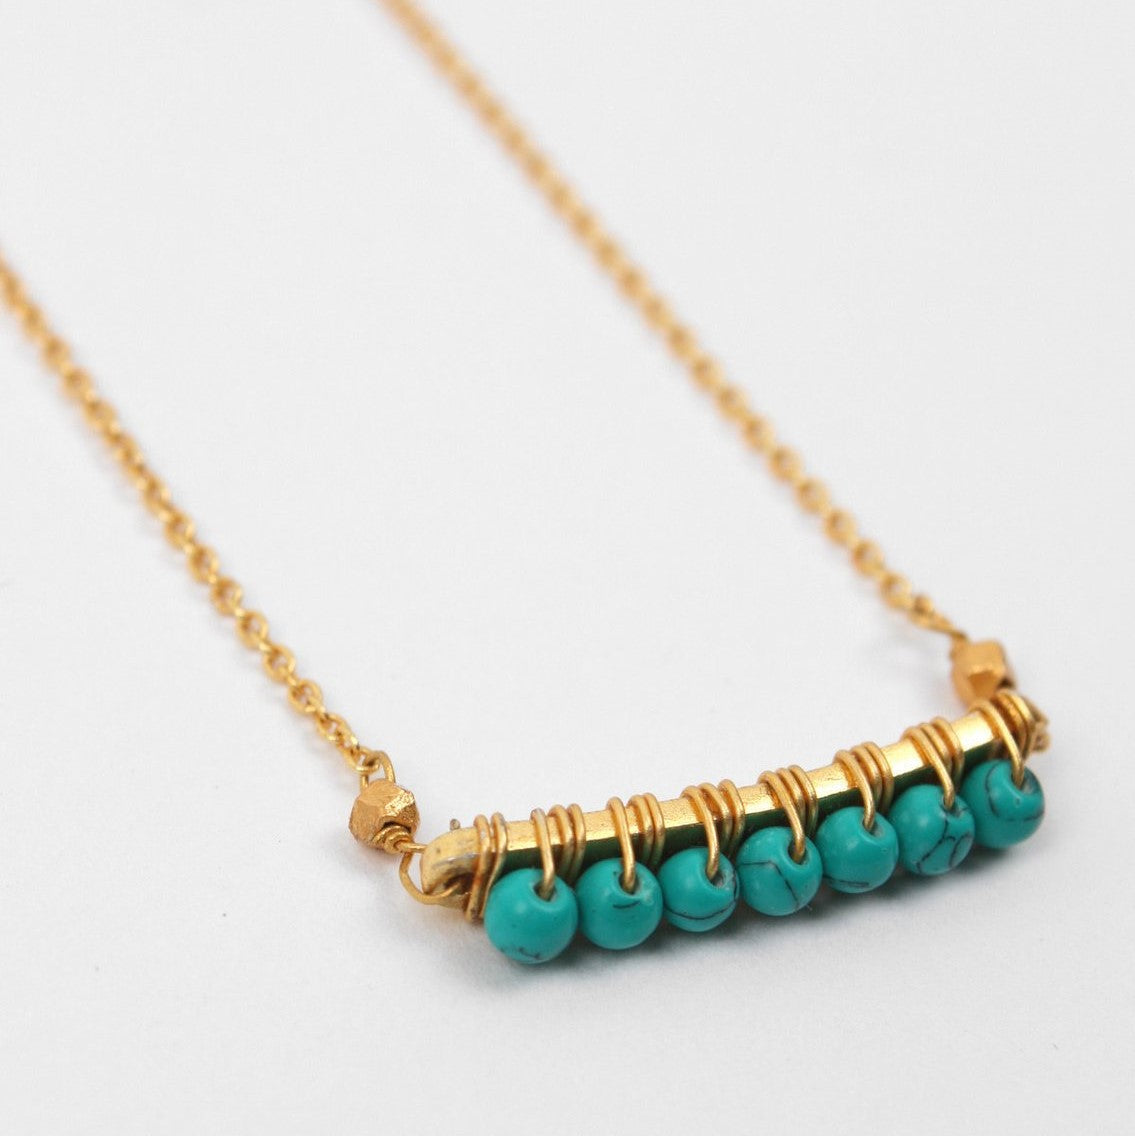 Turquoise Row Necklace - An Indian Summer